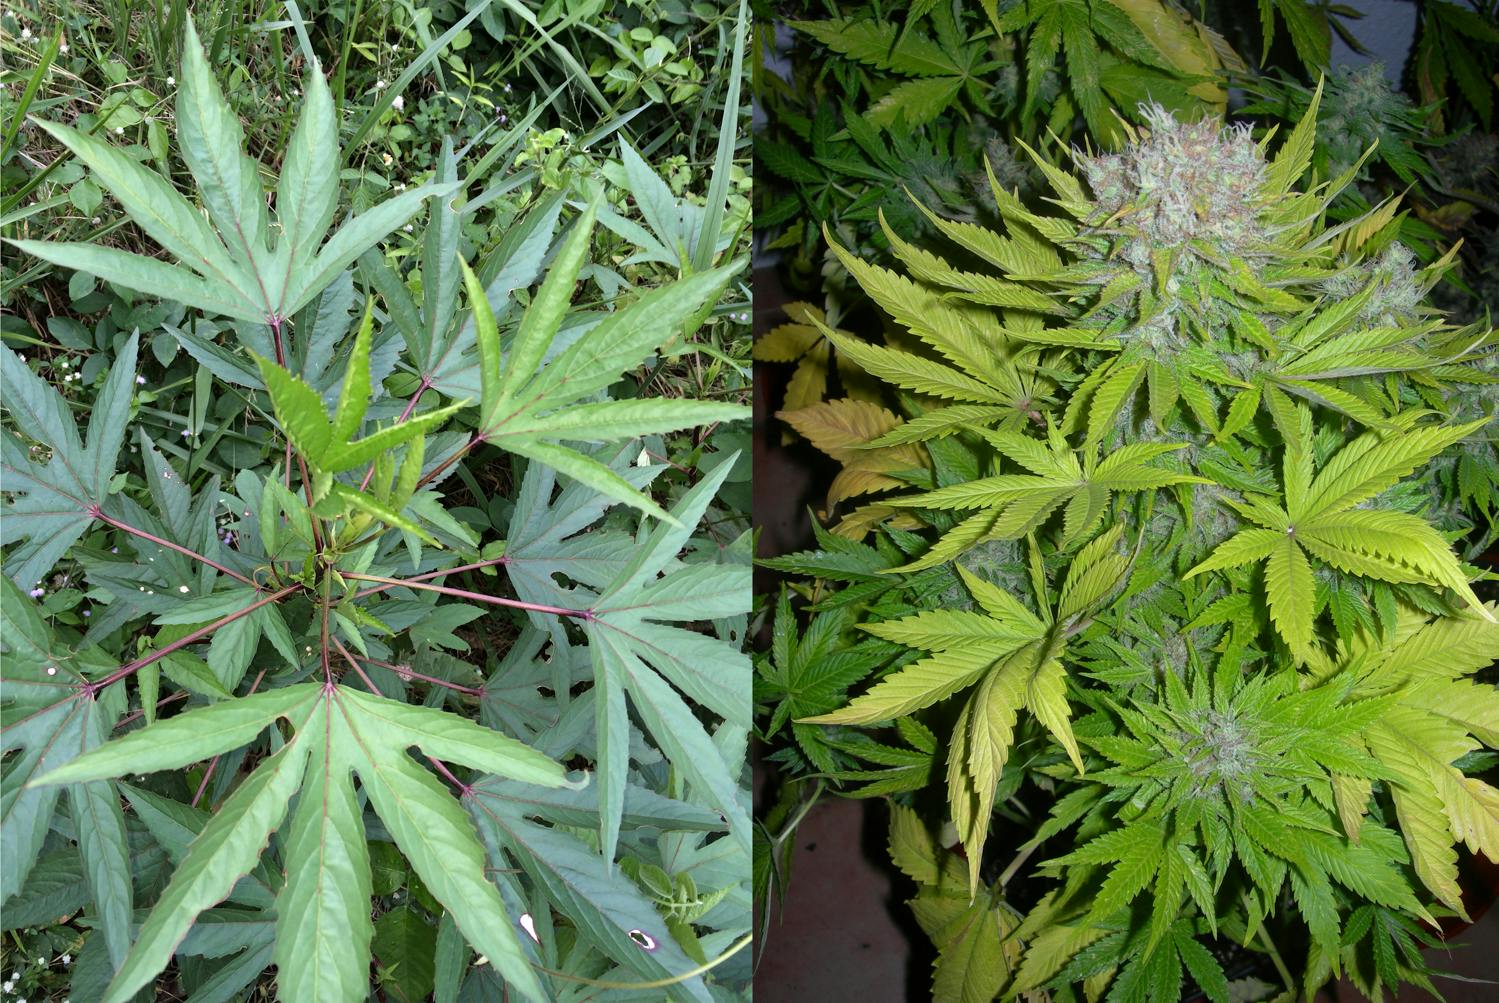 Elderly Couple Sues After Police Raid Mistakes Hibiscus Plants For Marijuana 1 of 1 Elderly couple arrested after cops thought hibiscus plants were marijuana